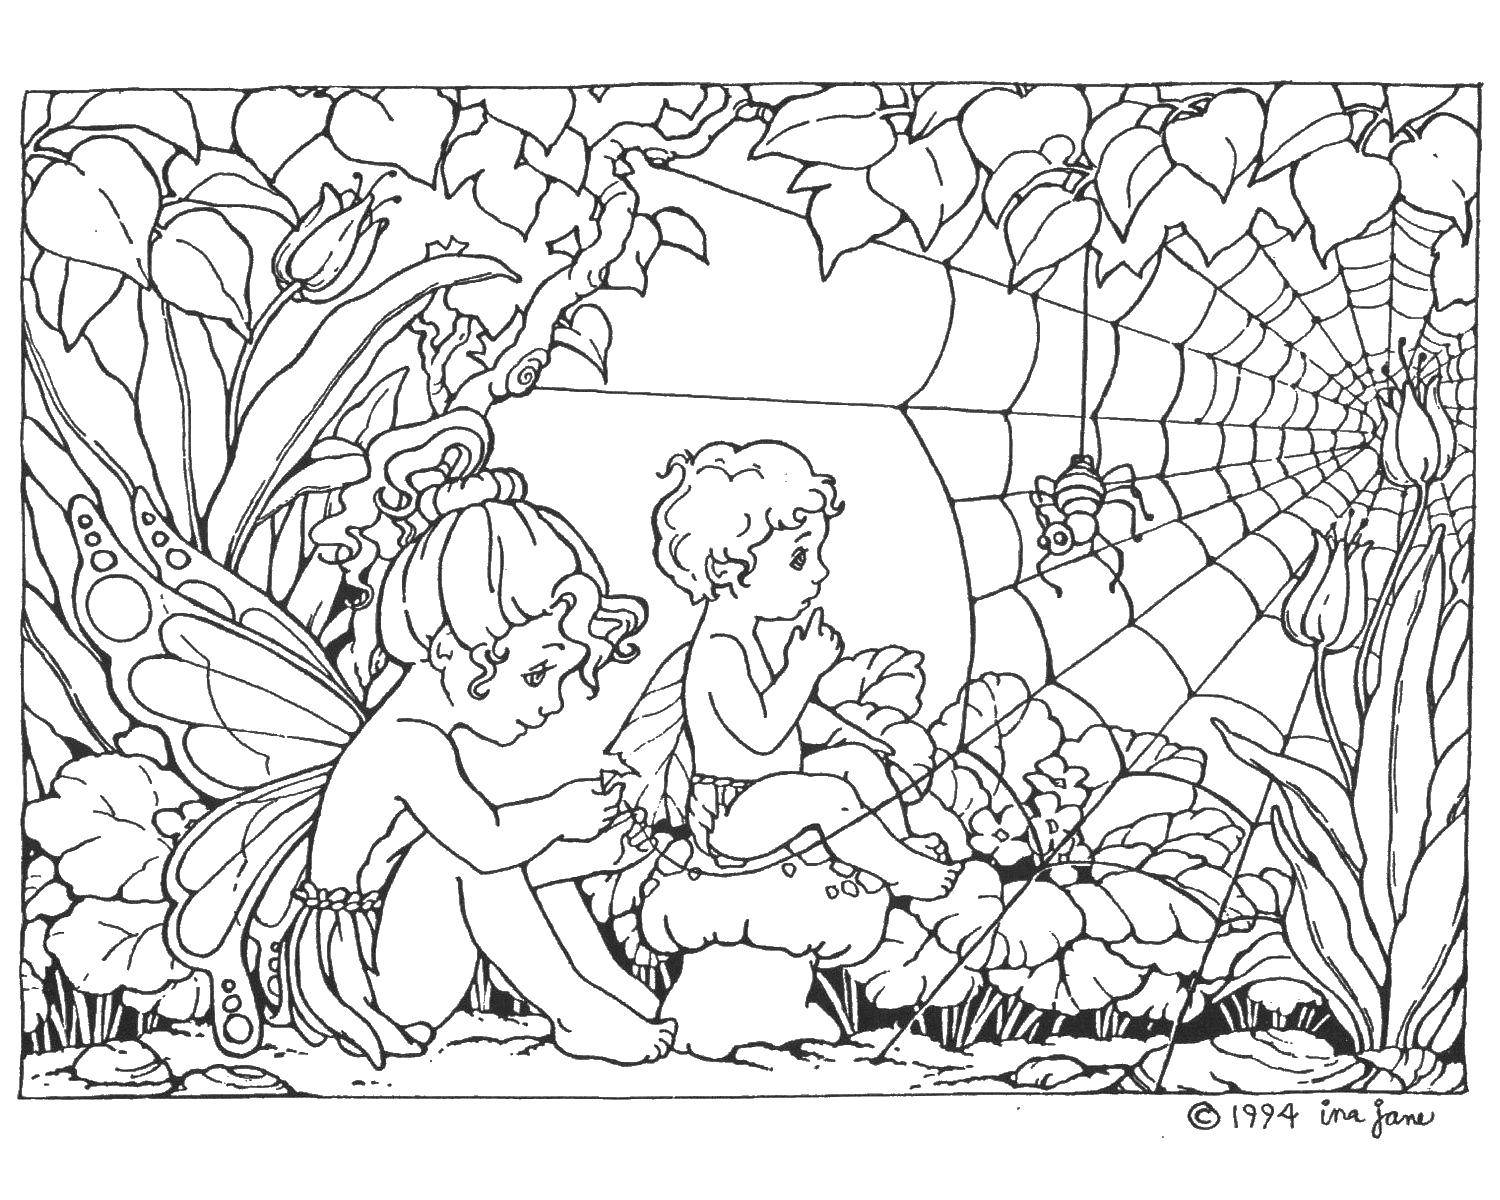 Coloring Children of nature. Category Nature. Tags:  nature, plants, children.